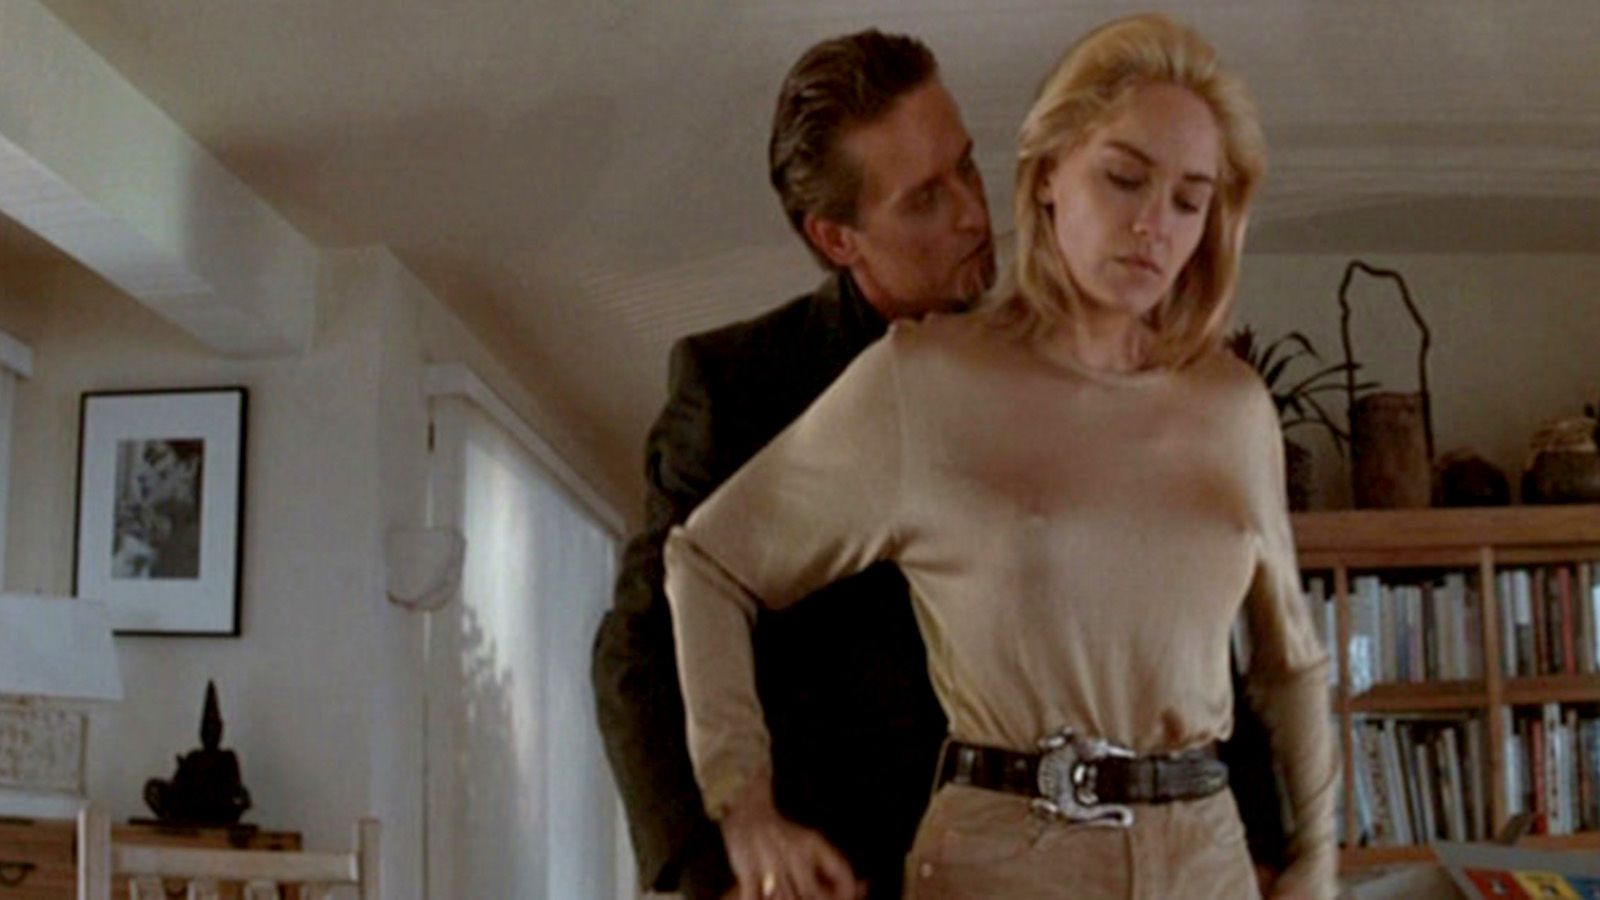 Sharon Stone says she can't stop XXX cut of 'Basic Instinct